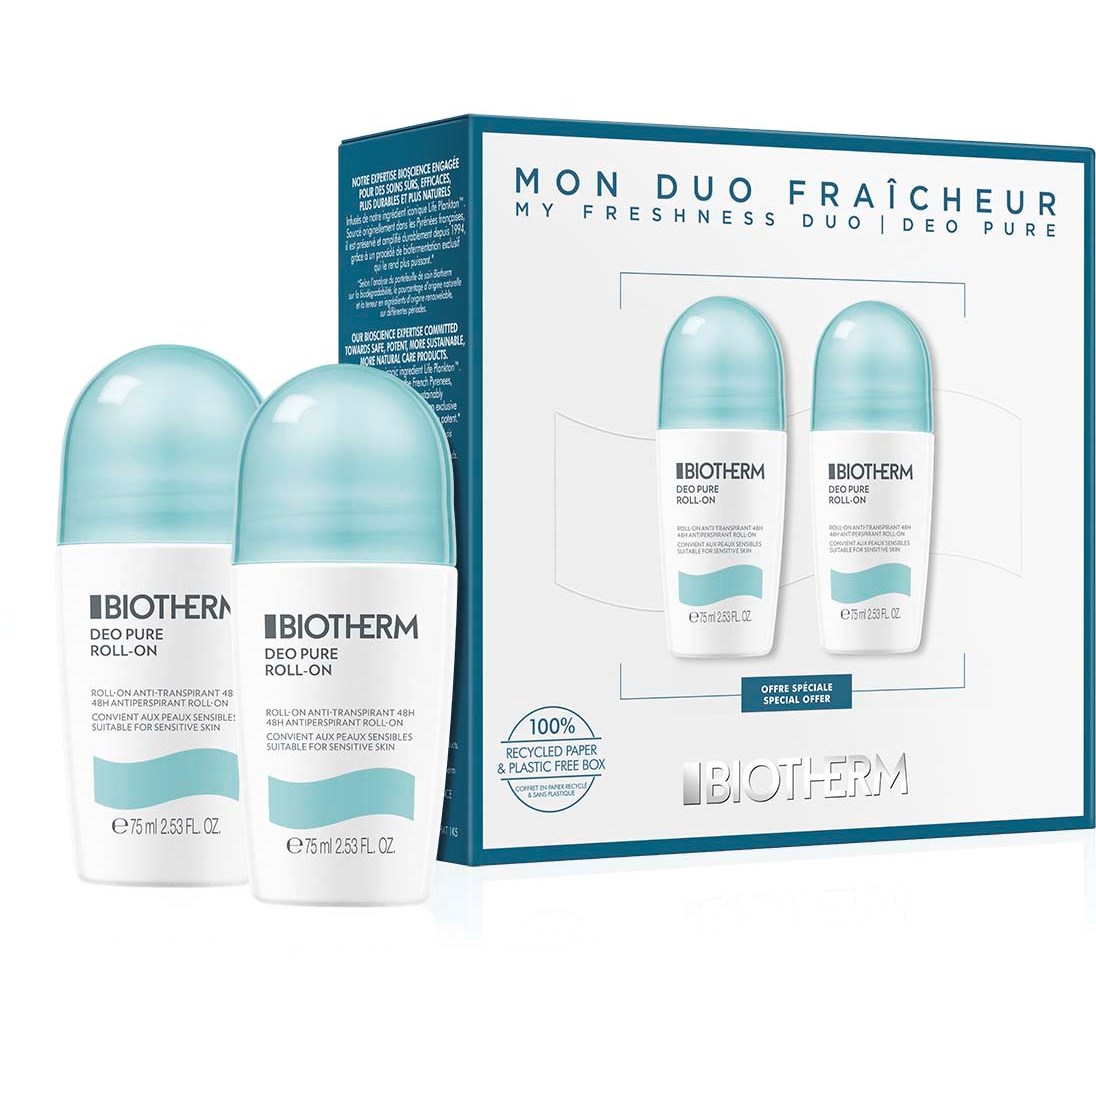 Läs mer om Biotherm Deo Pure Classic My Freshness Duo